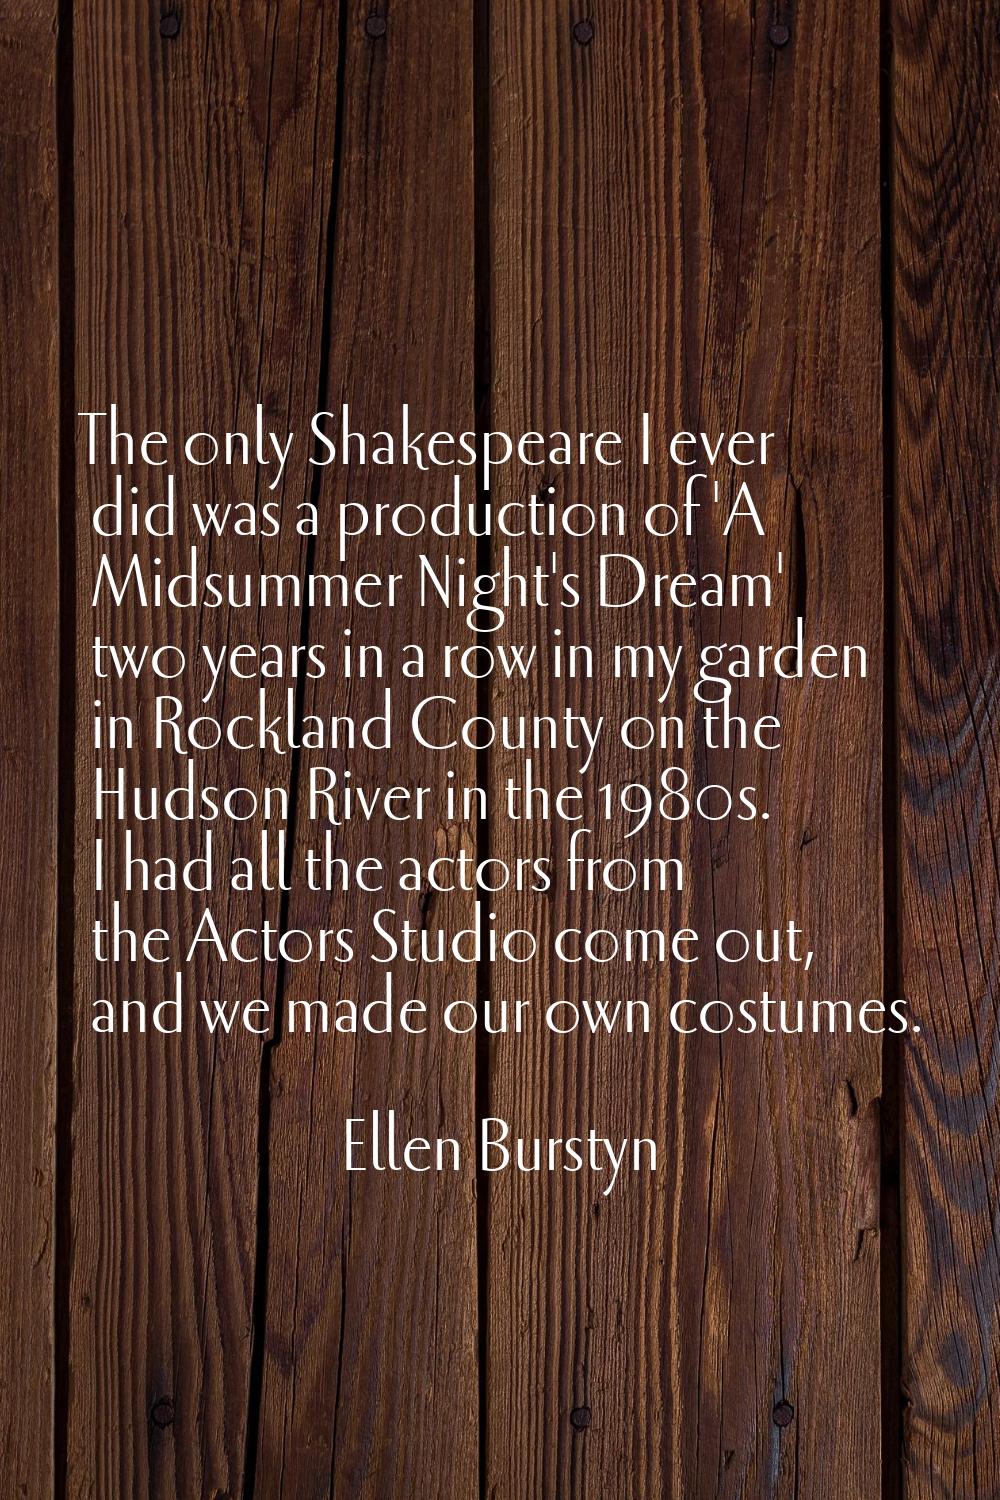 The only Shakespeare I ever did was a production of 'A Midsummer Night's Dream' two years in a row 